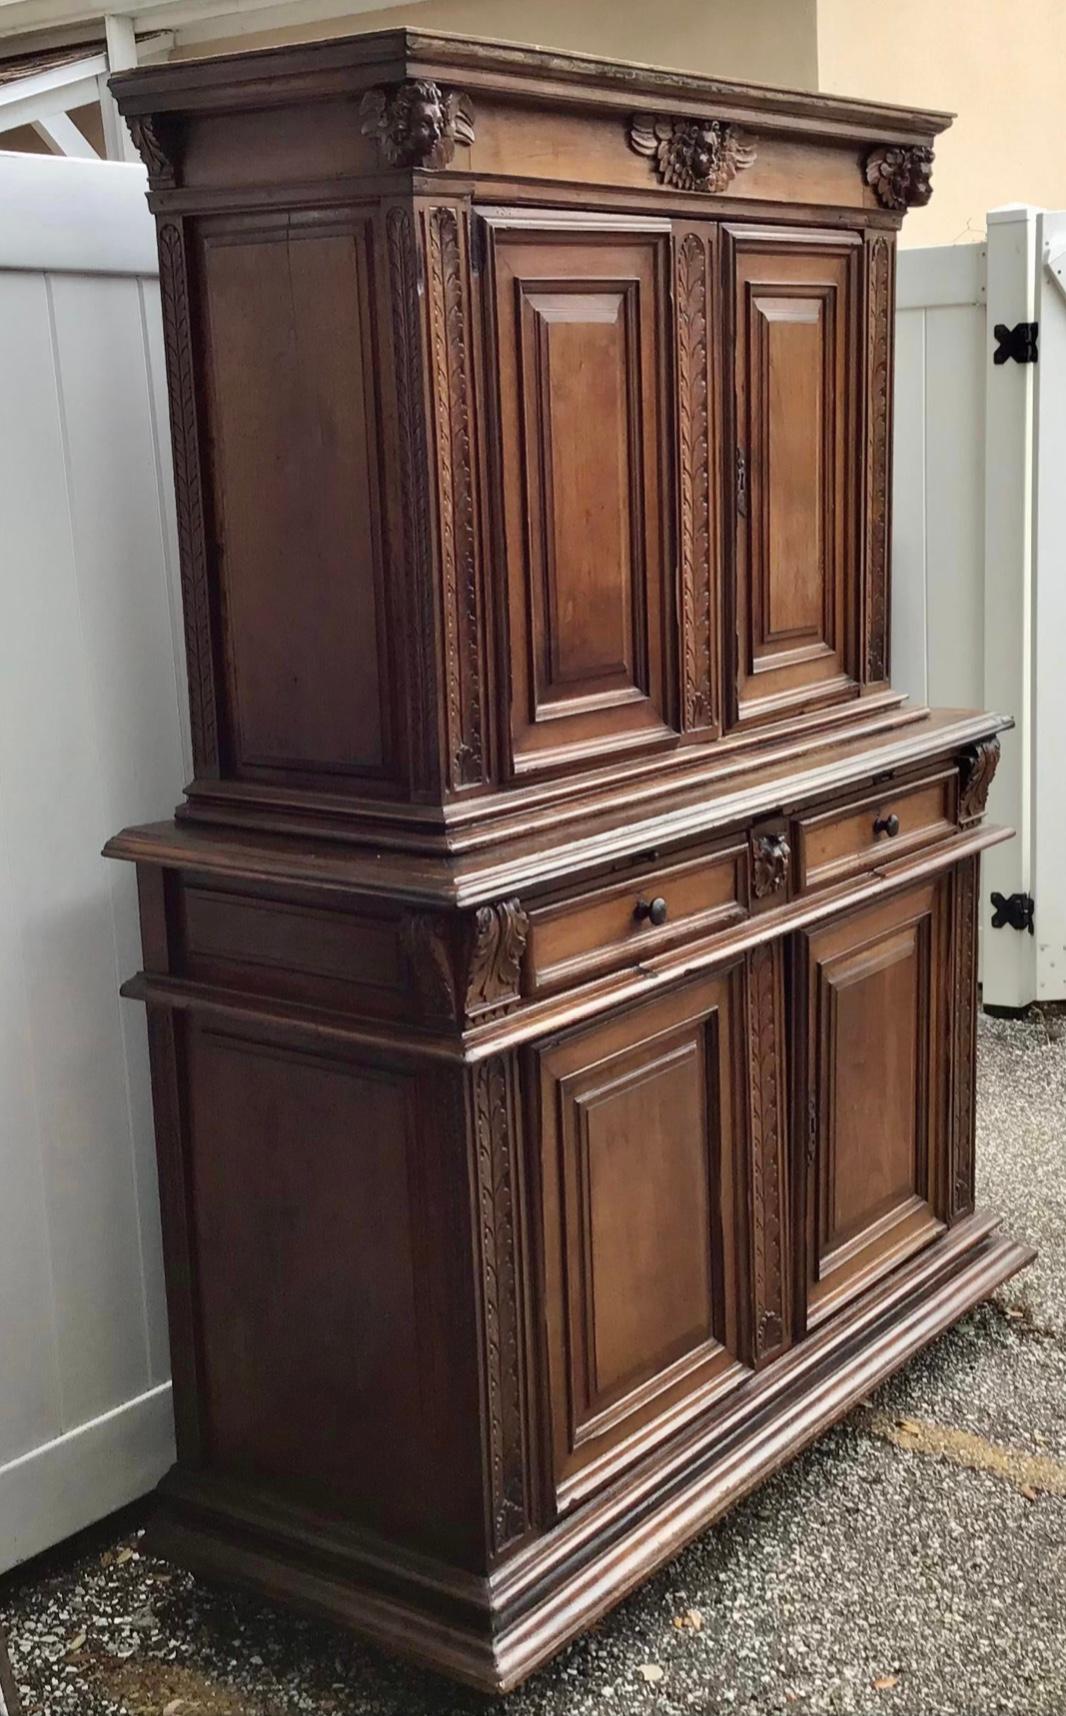 Beautiful rare large 17th century Italian Baroque Cabinet. In two parts with cabinet doors above and below and drawers in the middle. Carved with leaf design and cherubs or angels around the cornice. Wonderful old patina. Expert craftsmanship. A